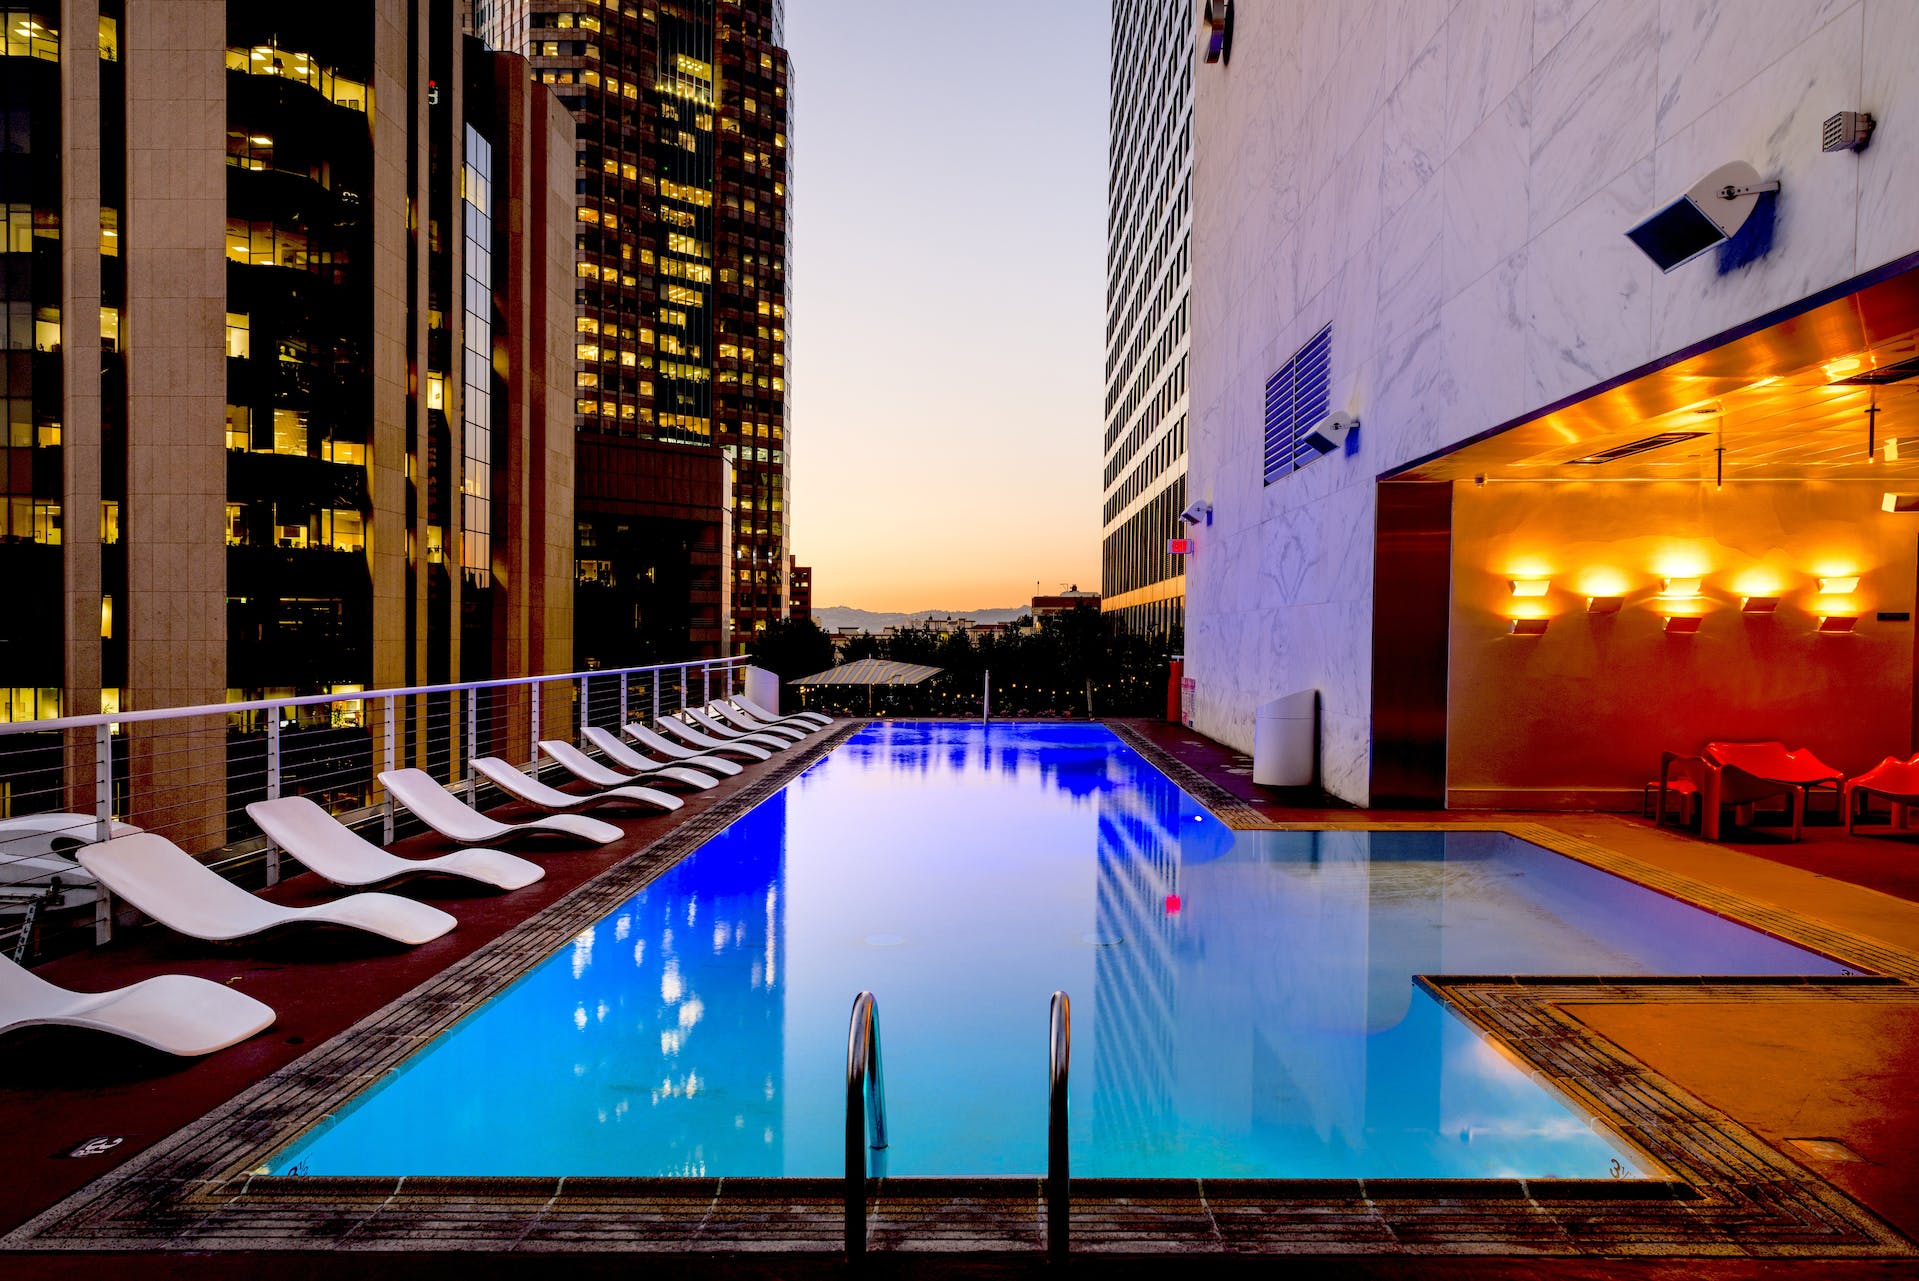 A pool in a hotel | Source: Pexels